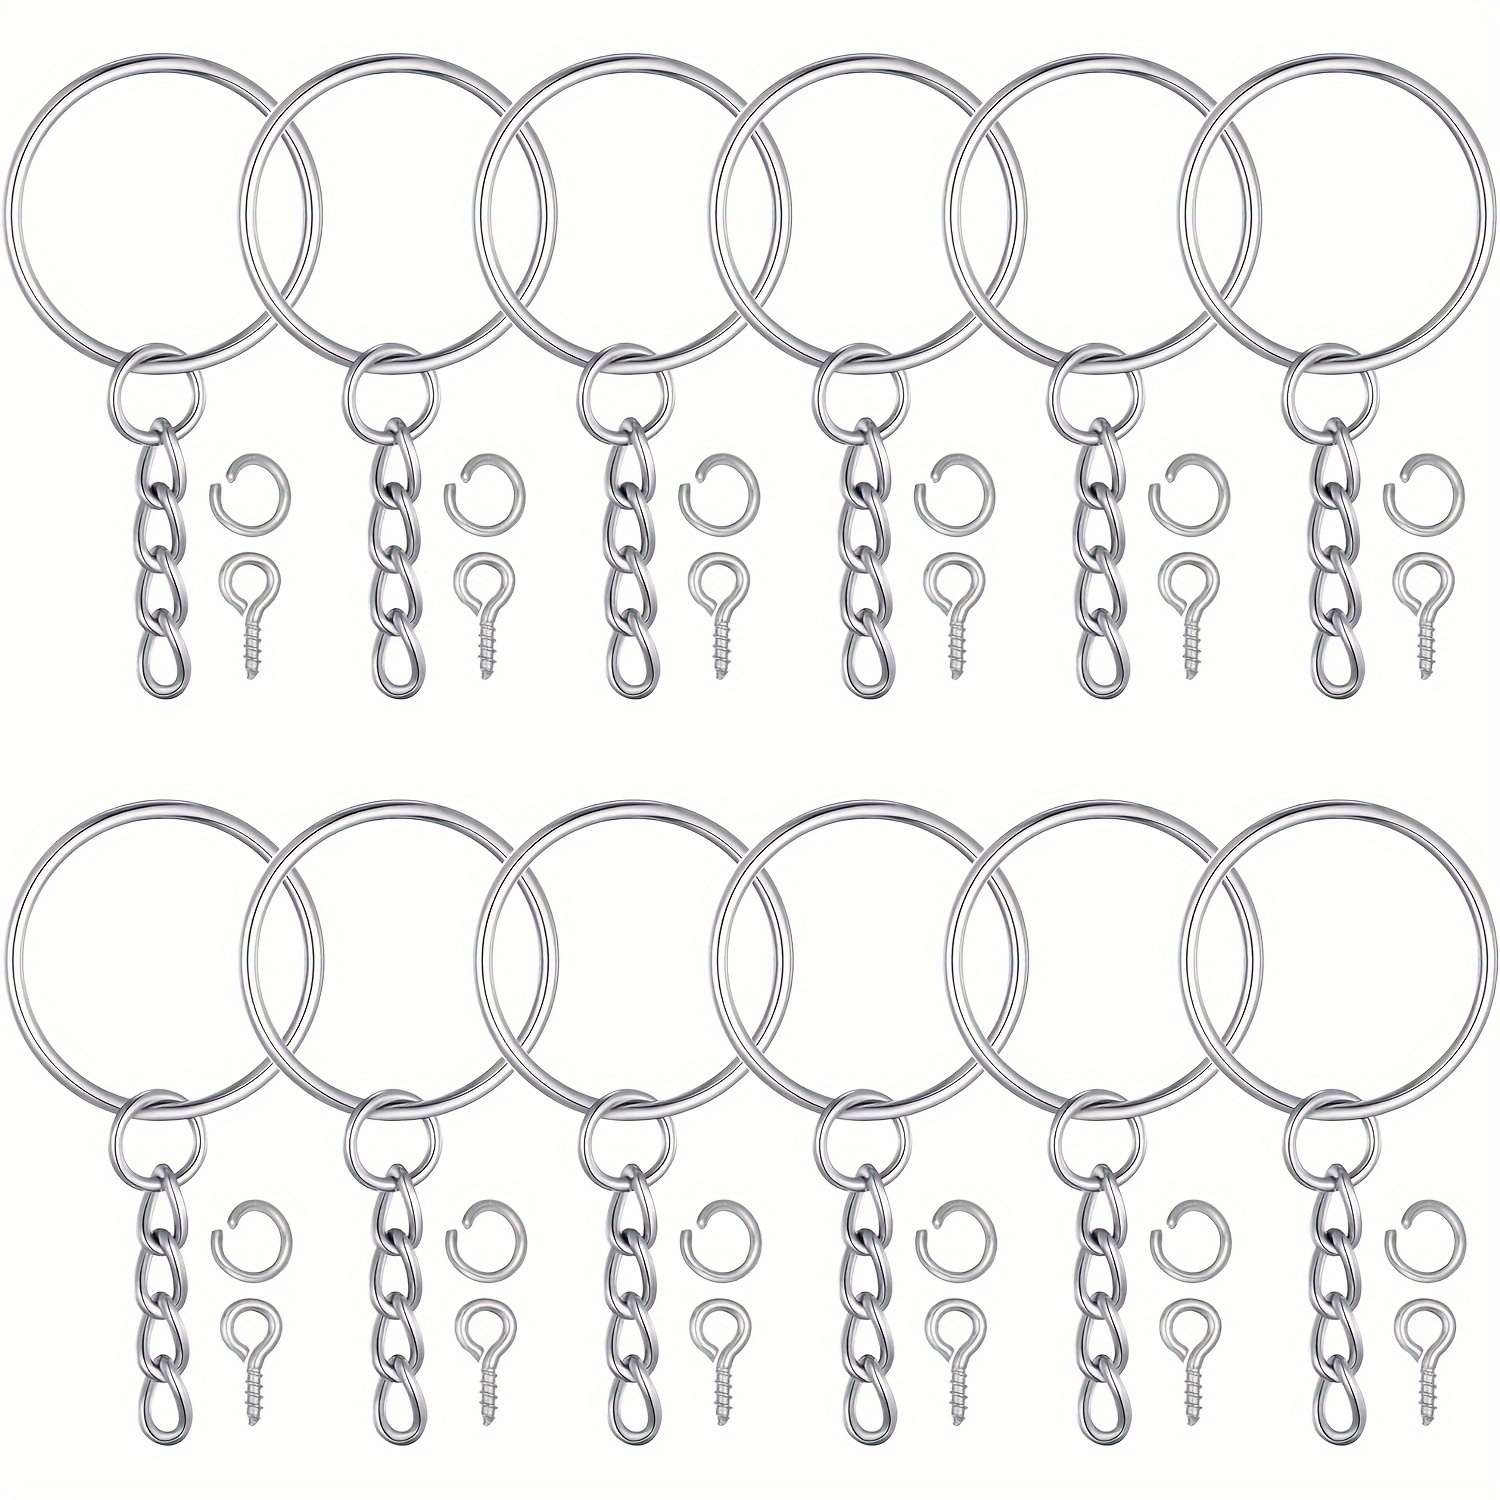 Suuchh 140 Pcs Split Key Rings, 1/2 inch Small Key Ring for Keychains,Silver Jewelry Jump Rings, Split Metal Key Rings Key Chains for Crafts Jump